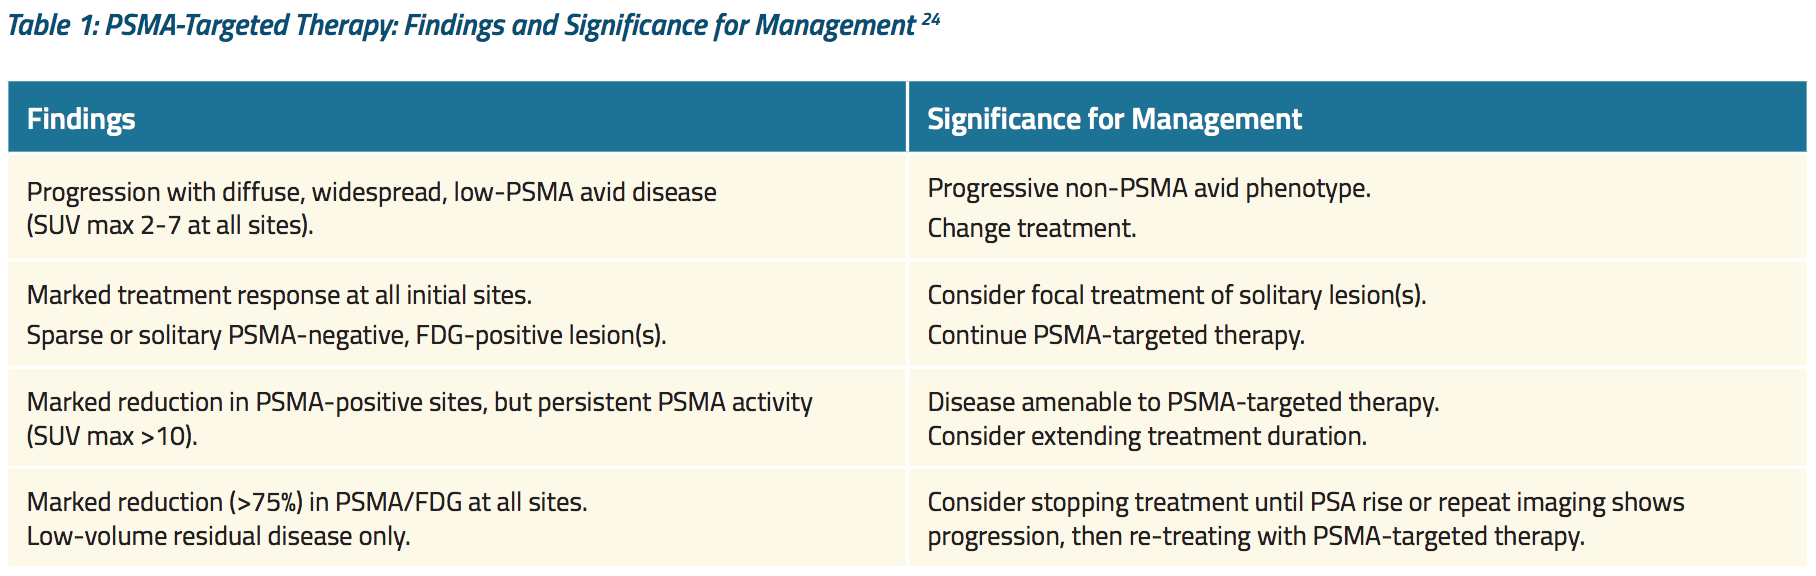 Table 1 PSMA Targeted Therapy Findings and Significance for Management